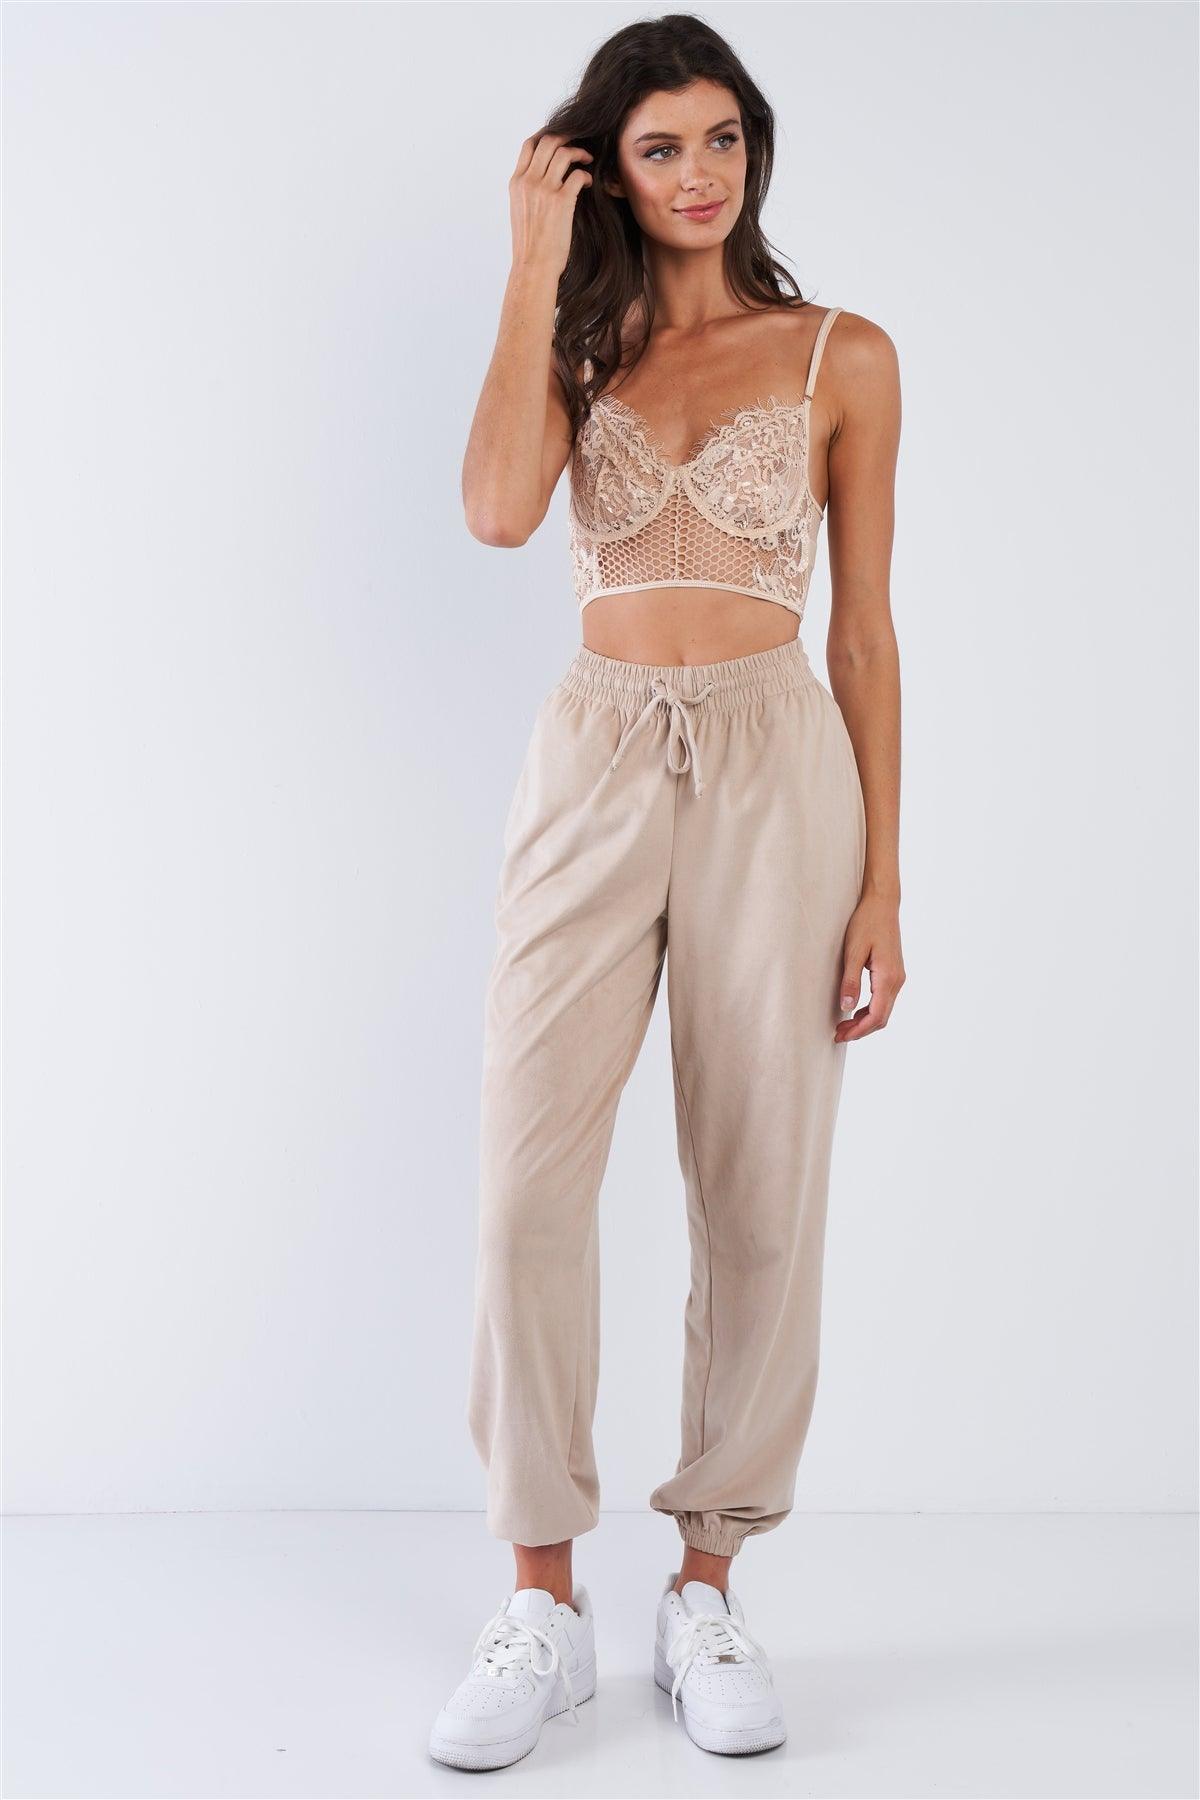 Nude Floral Lace Cropped Cami Underwire Bralette